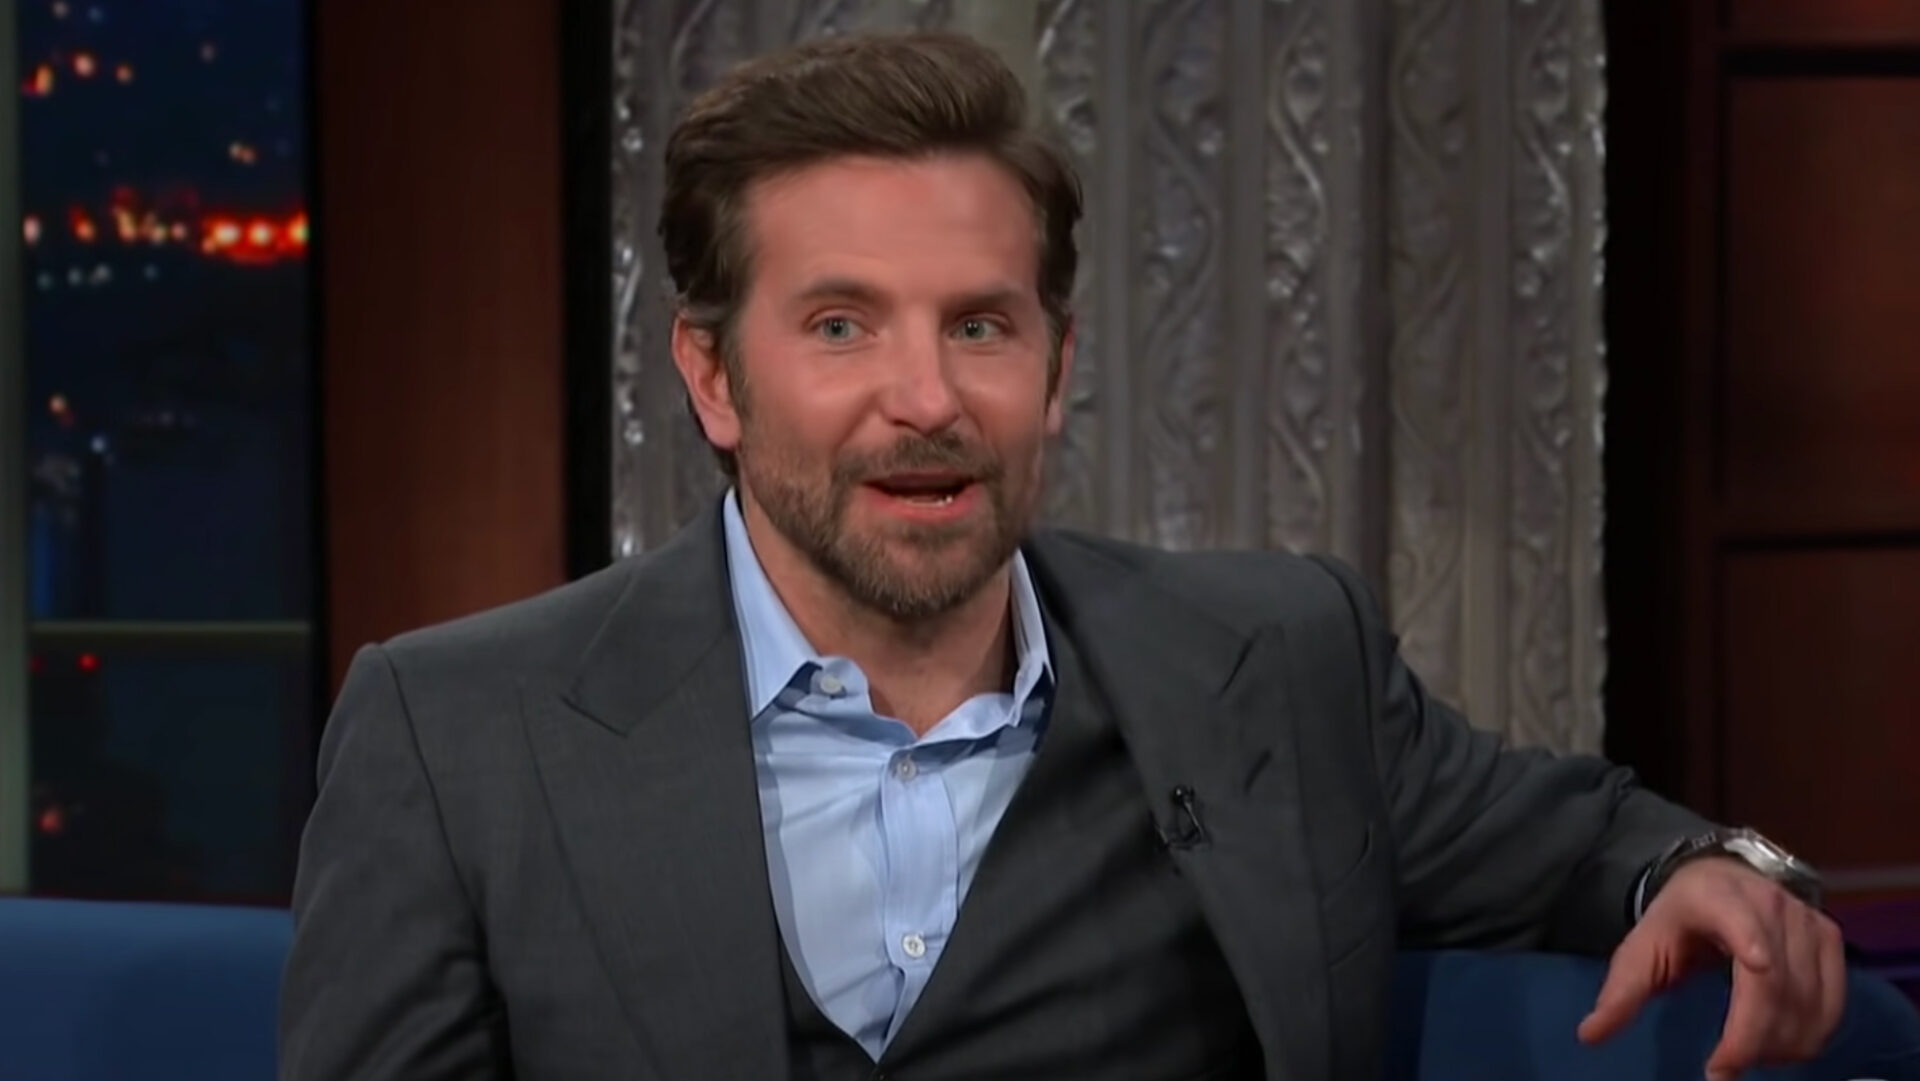 Why Bradley Cooper Considered Himself 'Lucky' on Sobriety Journey - Parade